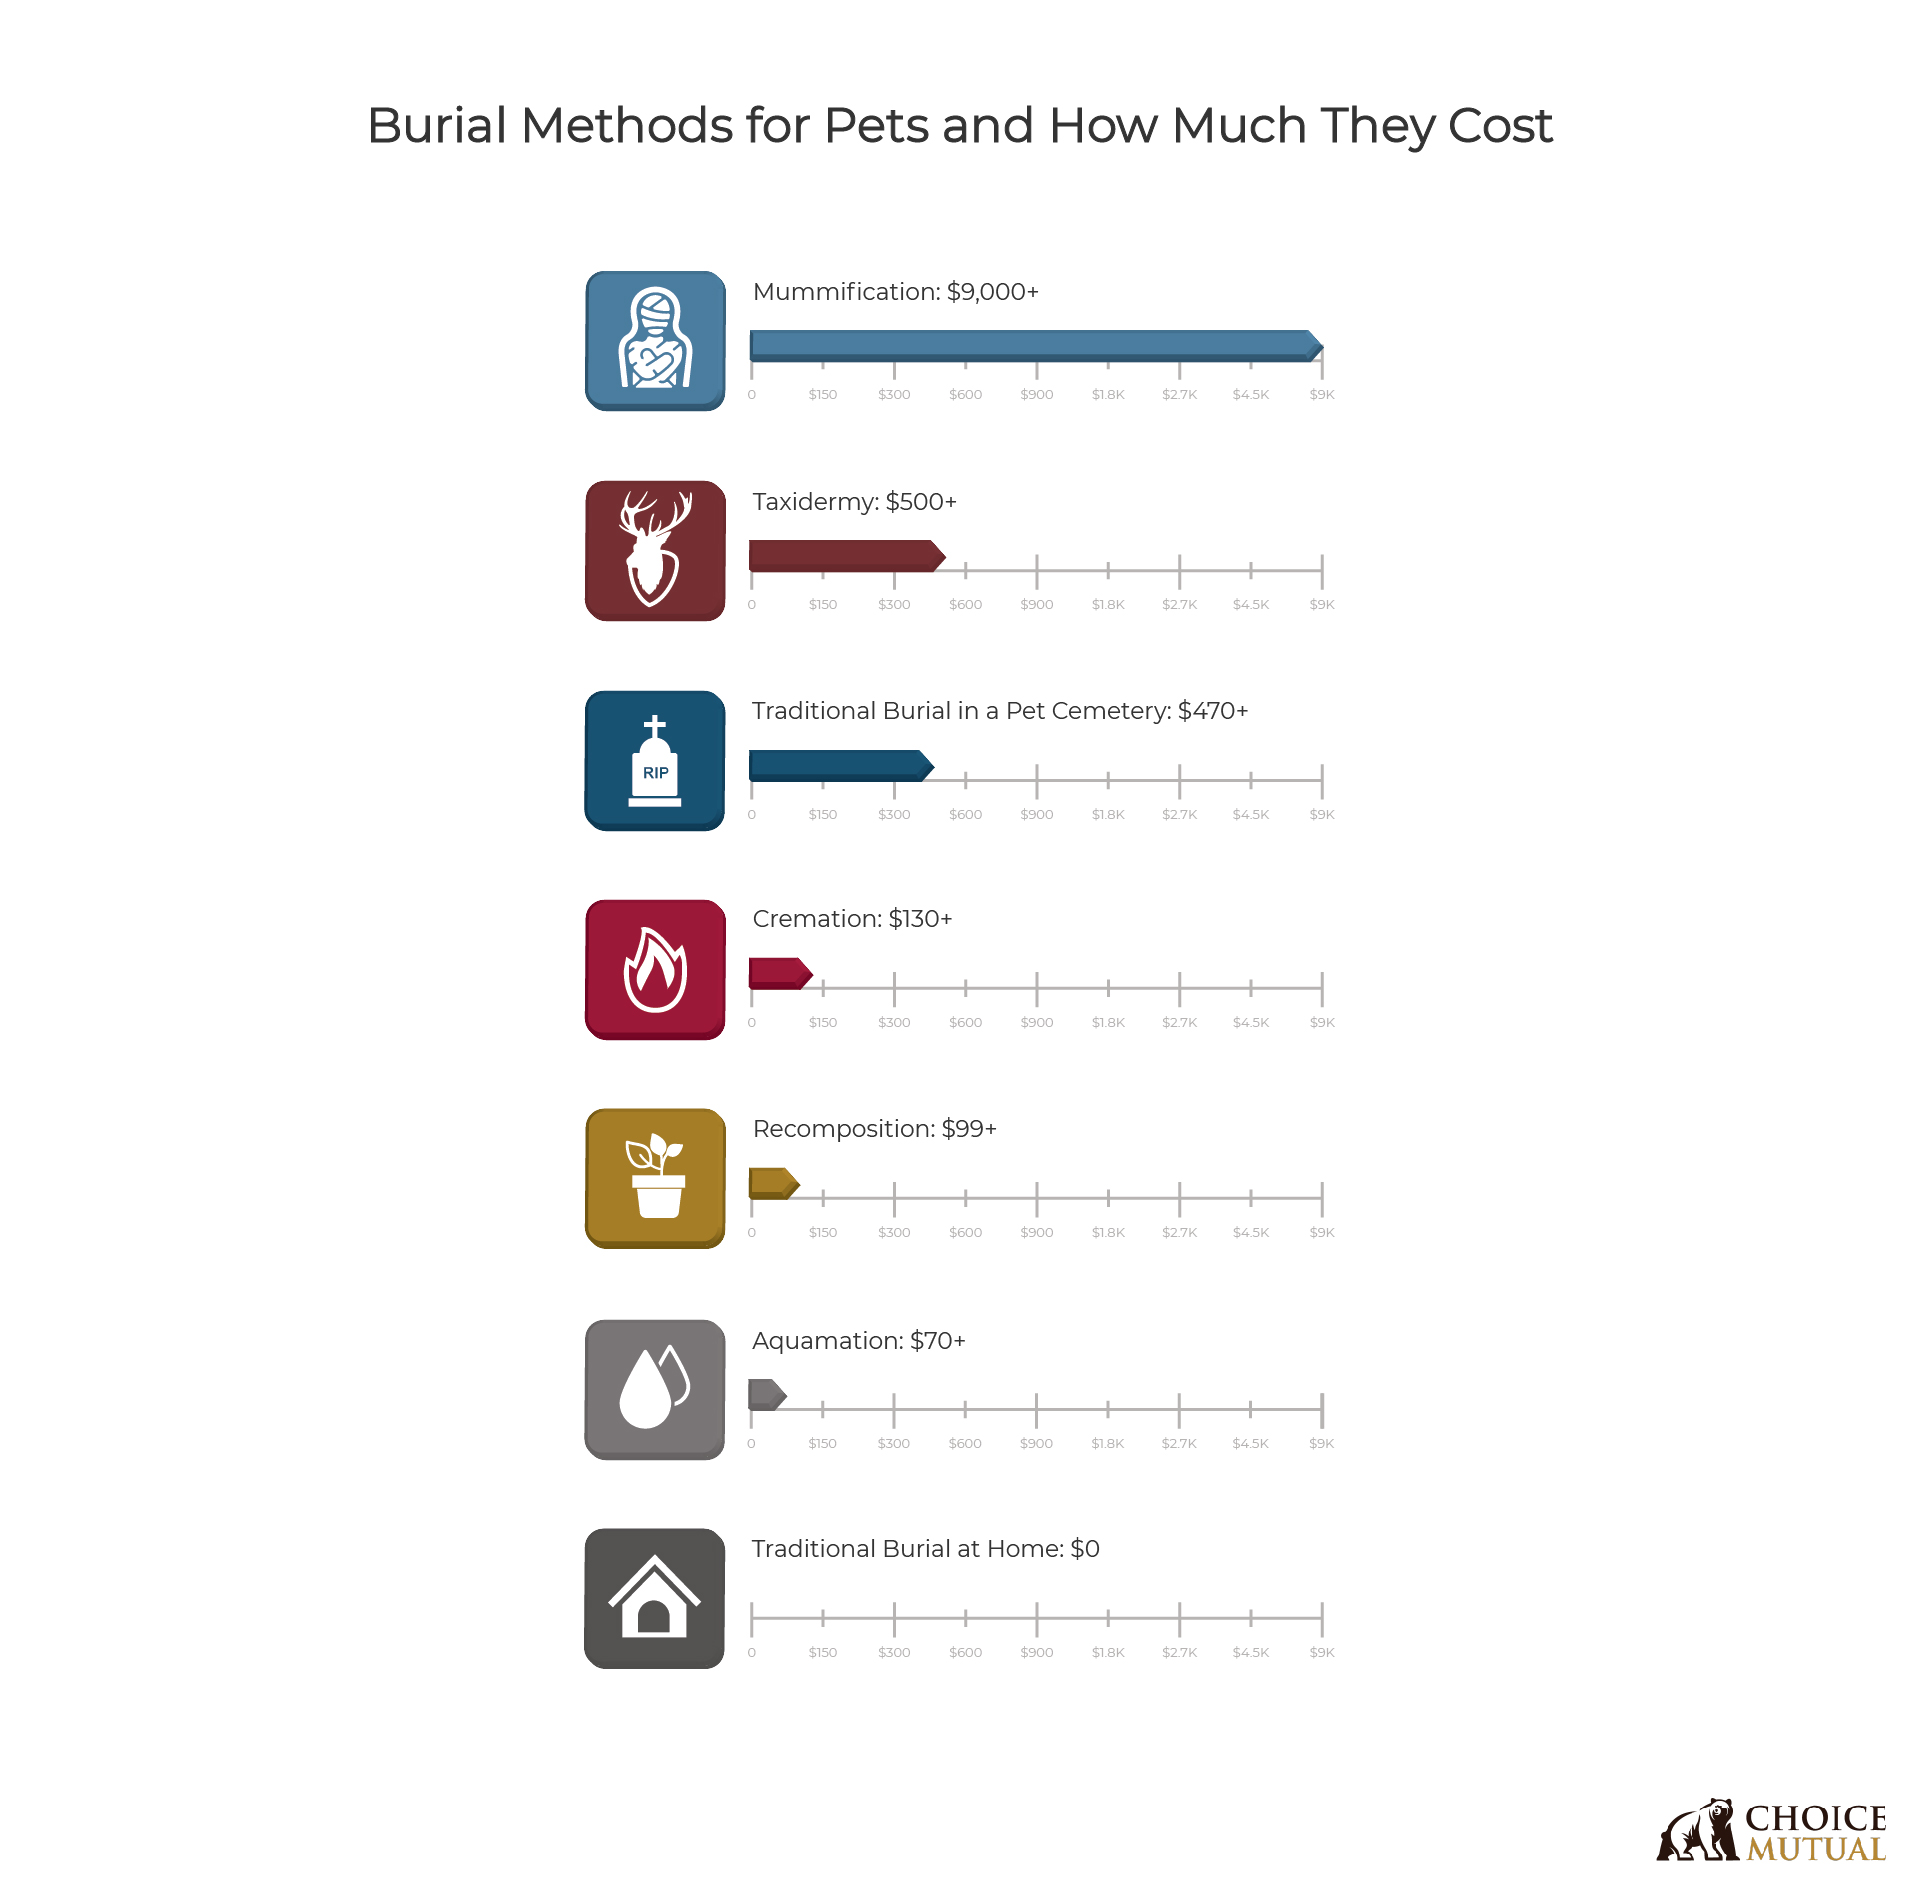 A chart showing the various pet burial options including the cost